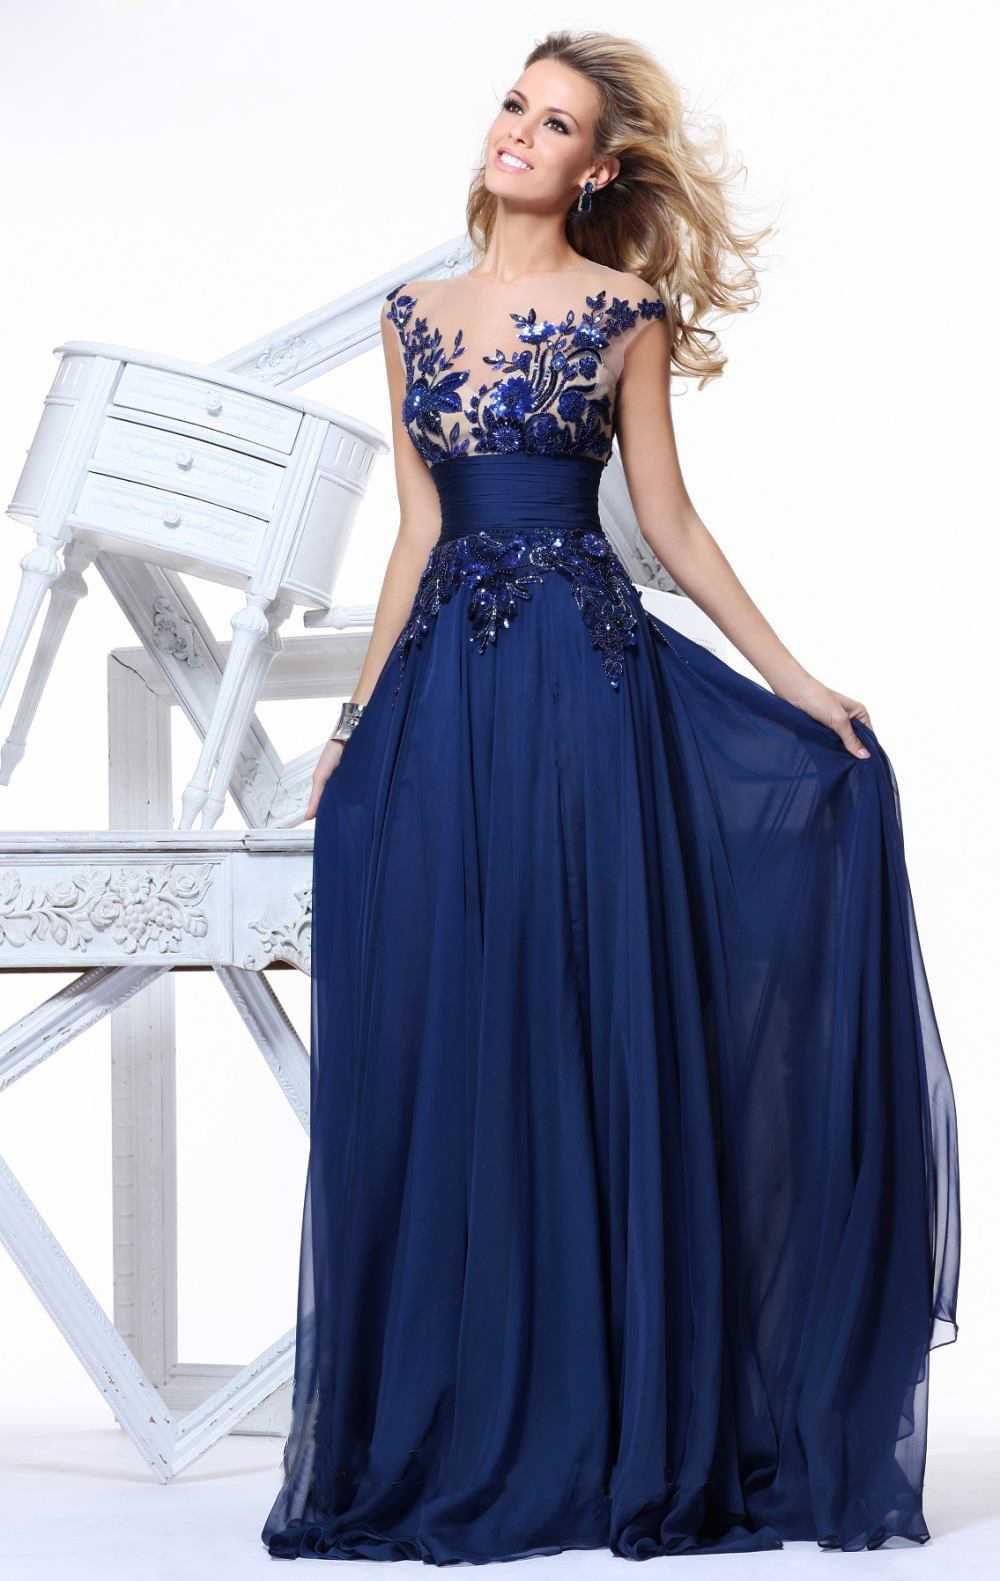 Hot Prom Dresses Royal Blue Cheap Fashion Boat Neck Lace Beaded ...